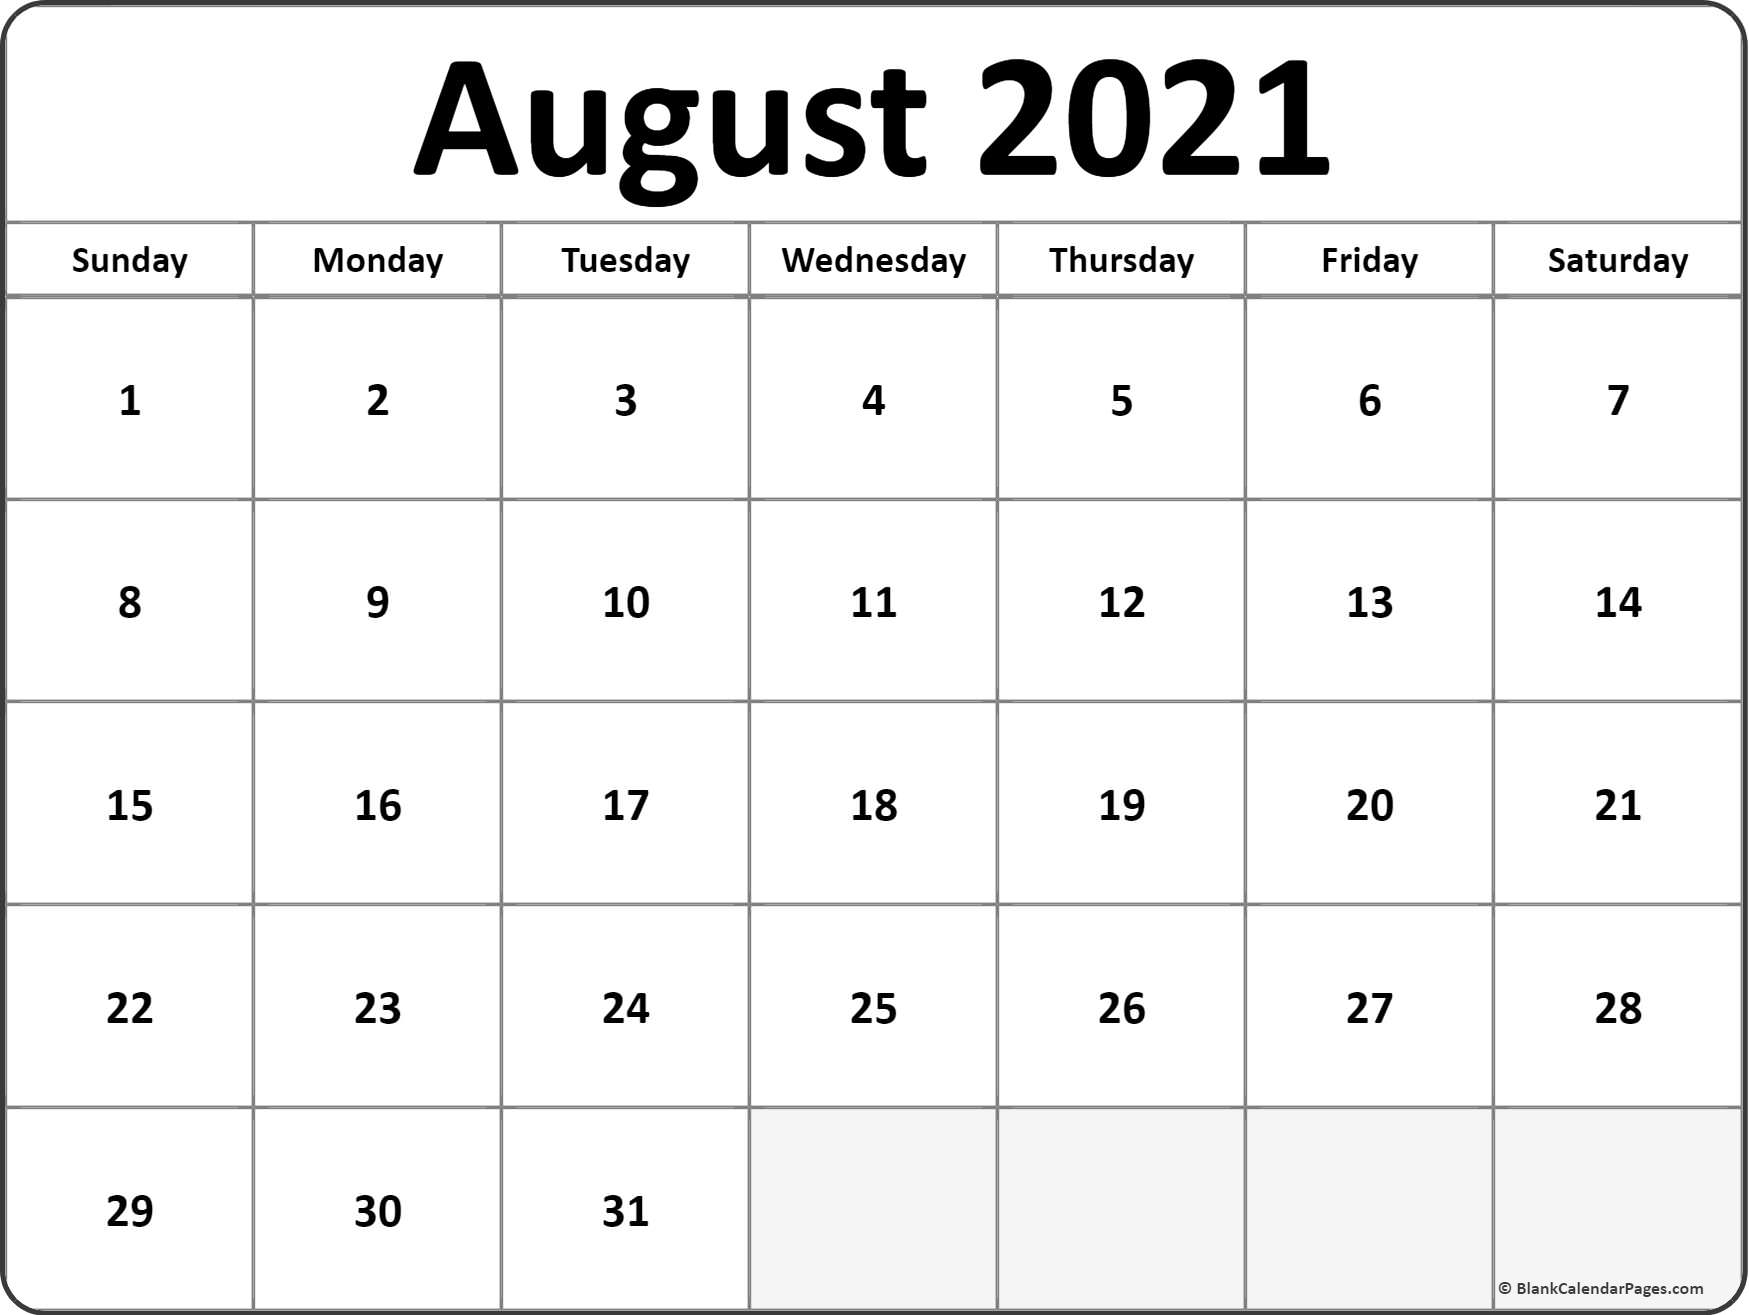 August 2021 Calendar | Free Printable Calendar Templates intended for Calendars Printable 2021 Free With Grid Lines